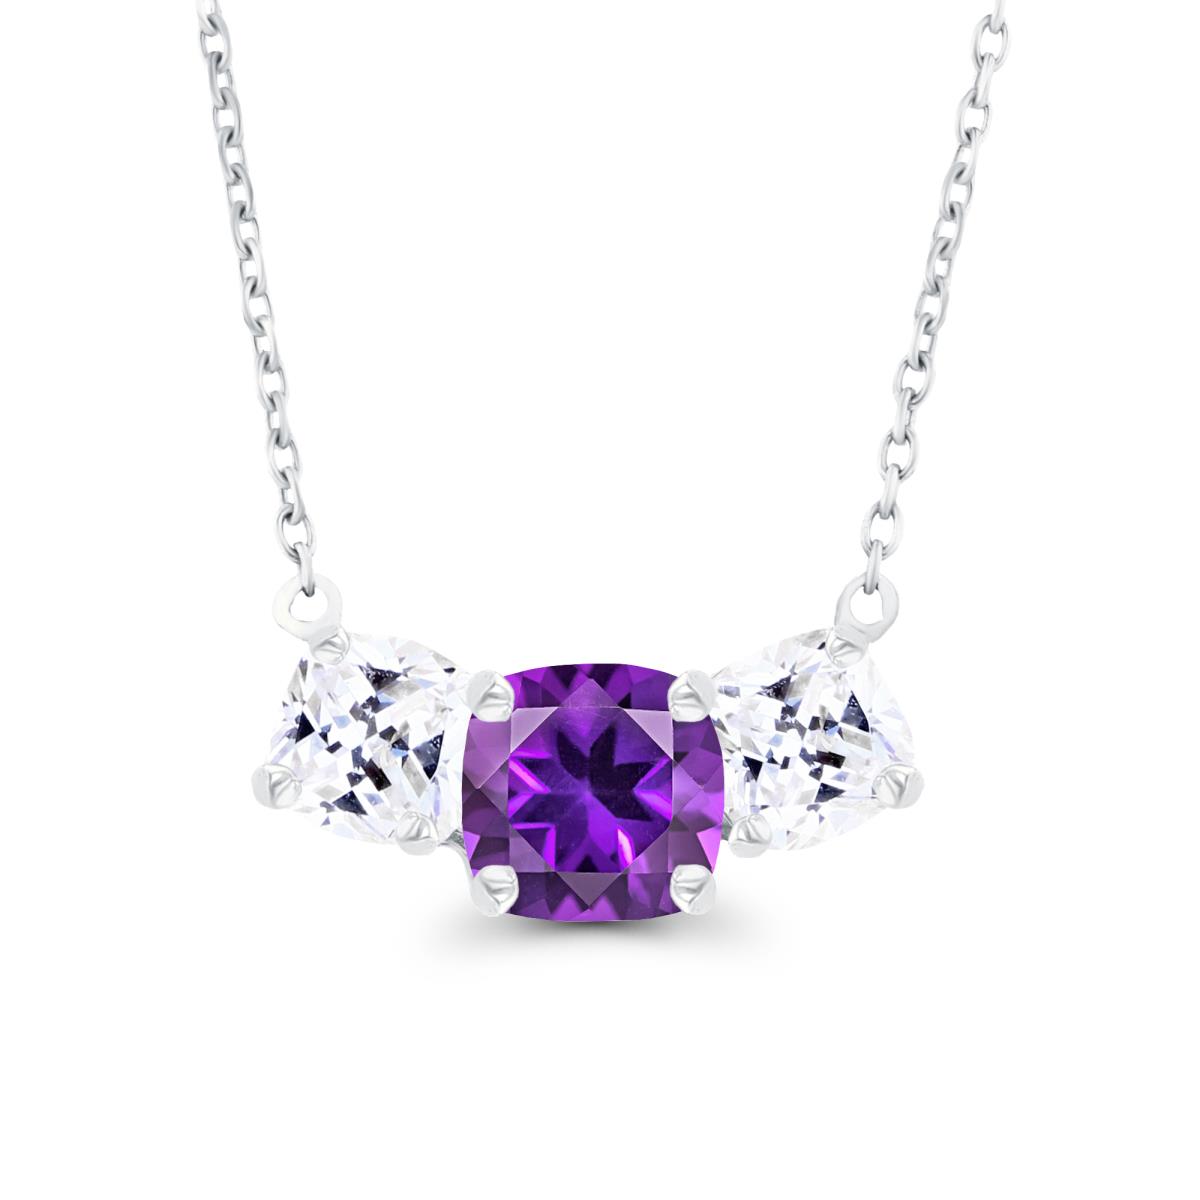 14K White Gold 5mm Cushion Amethyst & 4mm Cushion Created White Sapphire 3-Stone 18" Necklace